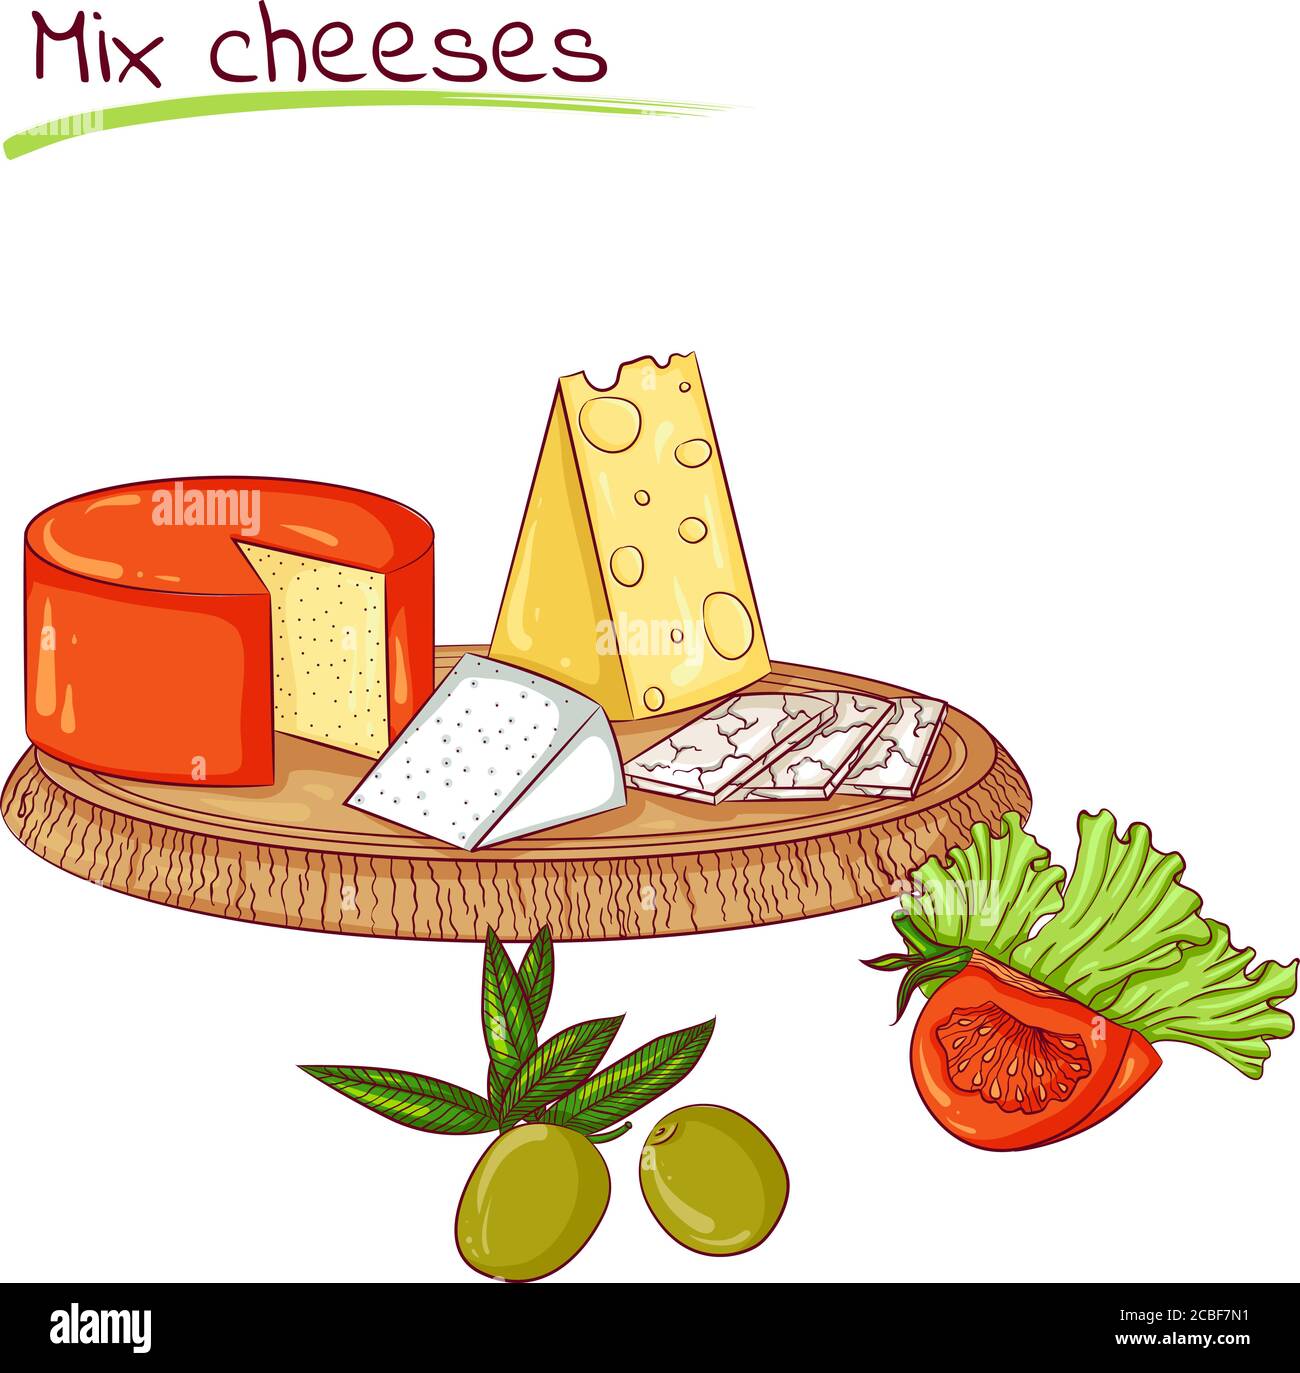 Vector illustration of mix cheeses isolated on white background. Food Icon. Design for cookbook, restaurant business. Series of food, drinks and ingredients for cooking. Stock Vector